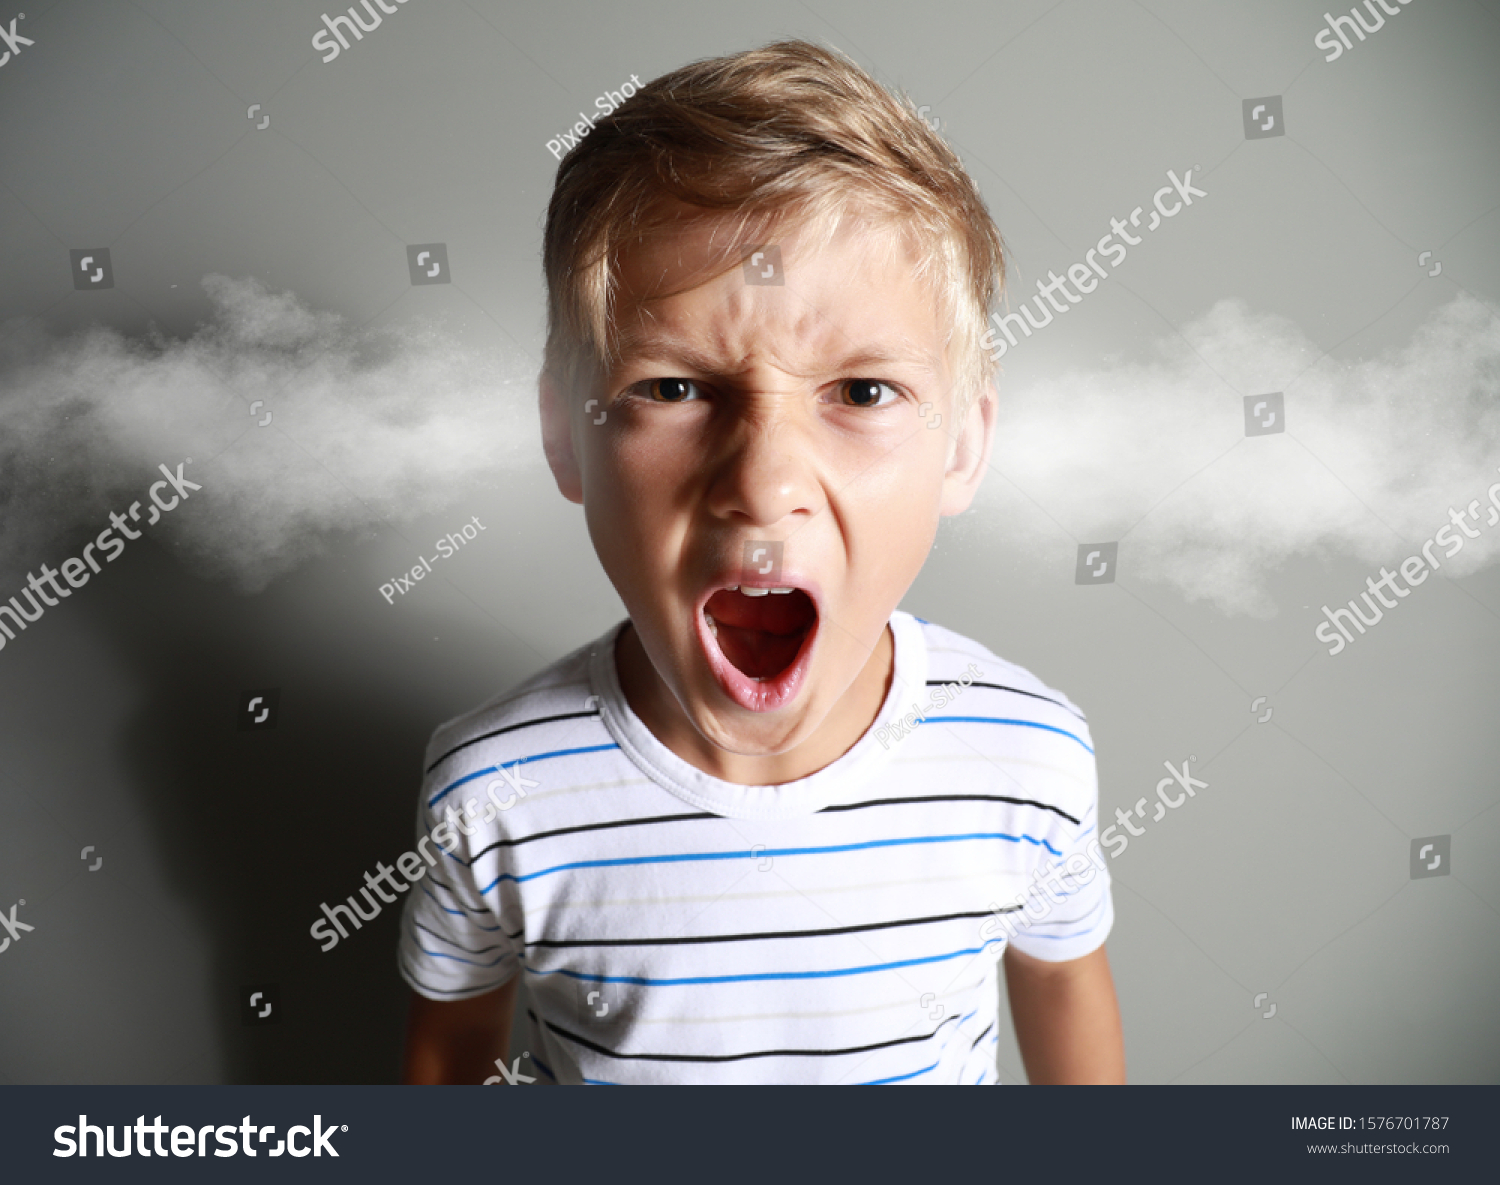 Portrait of angry little boy with steam coming out of ears on grey background #1576701787